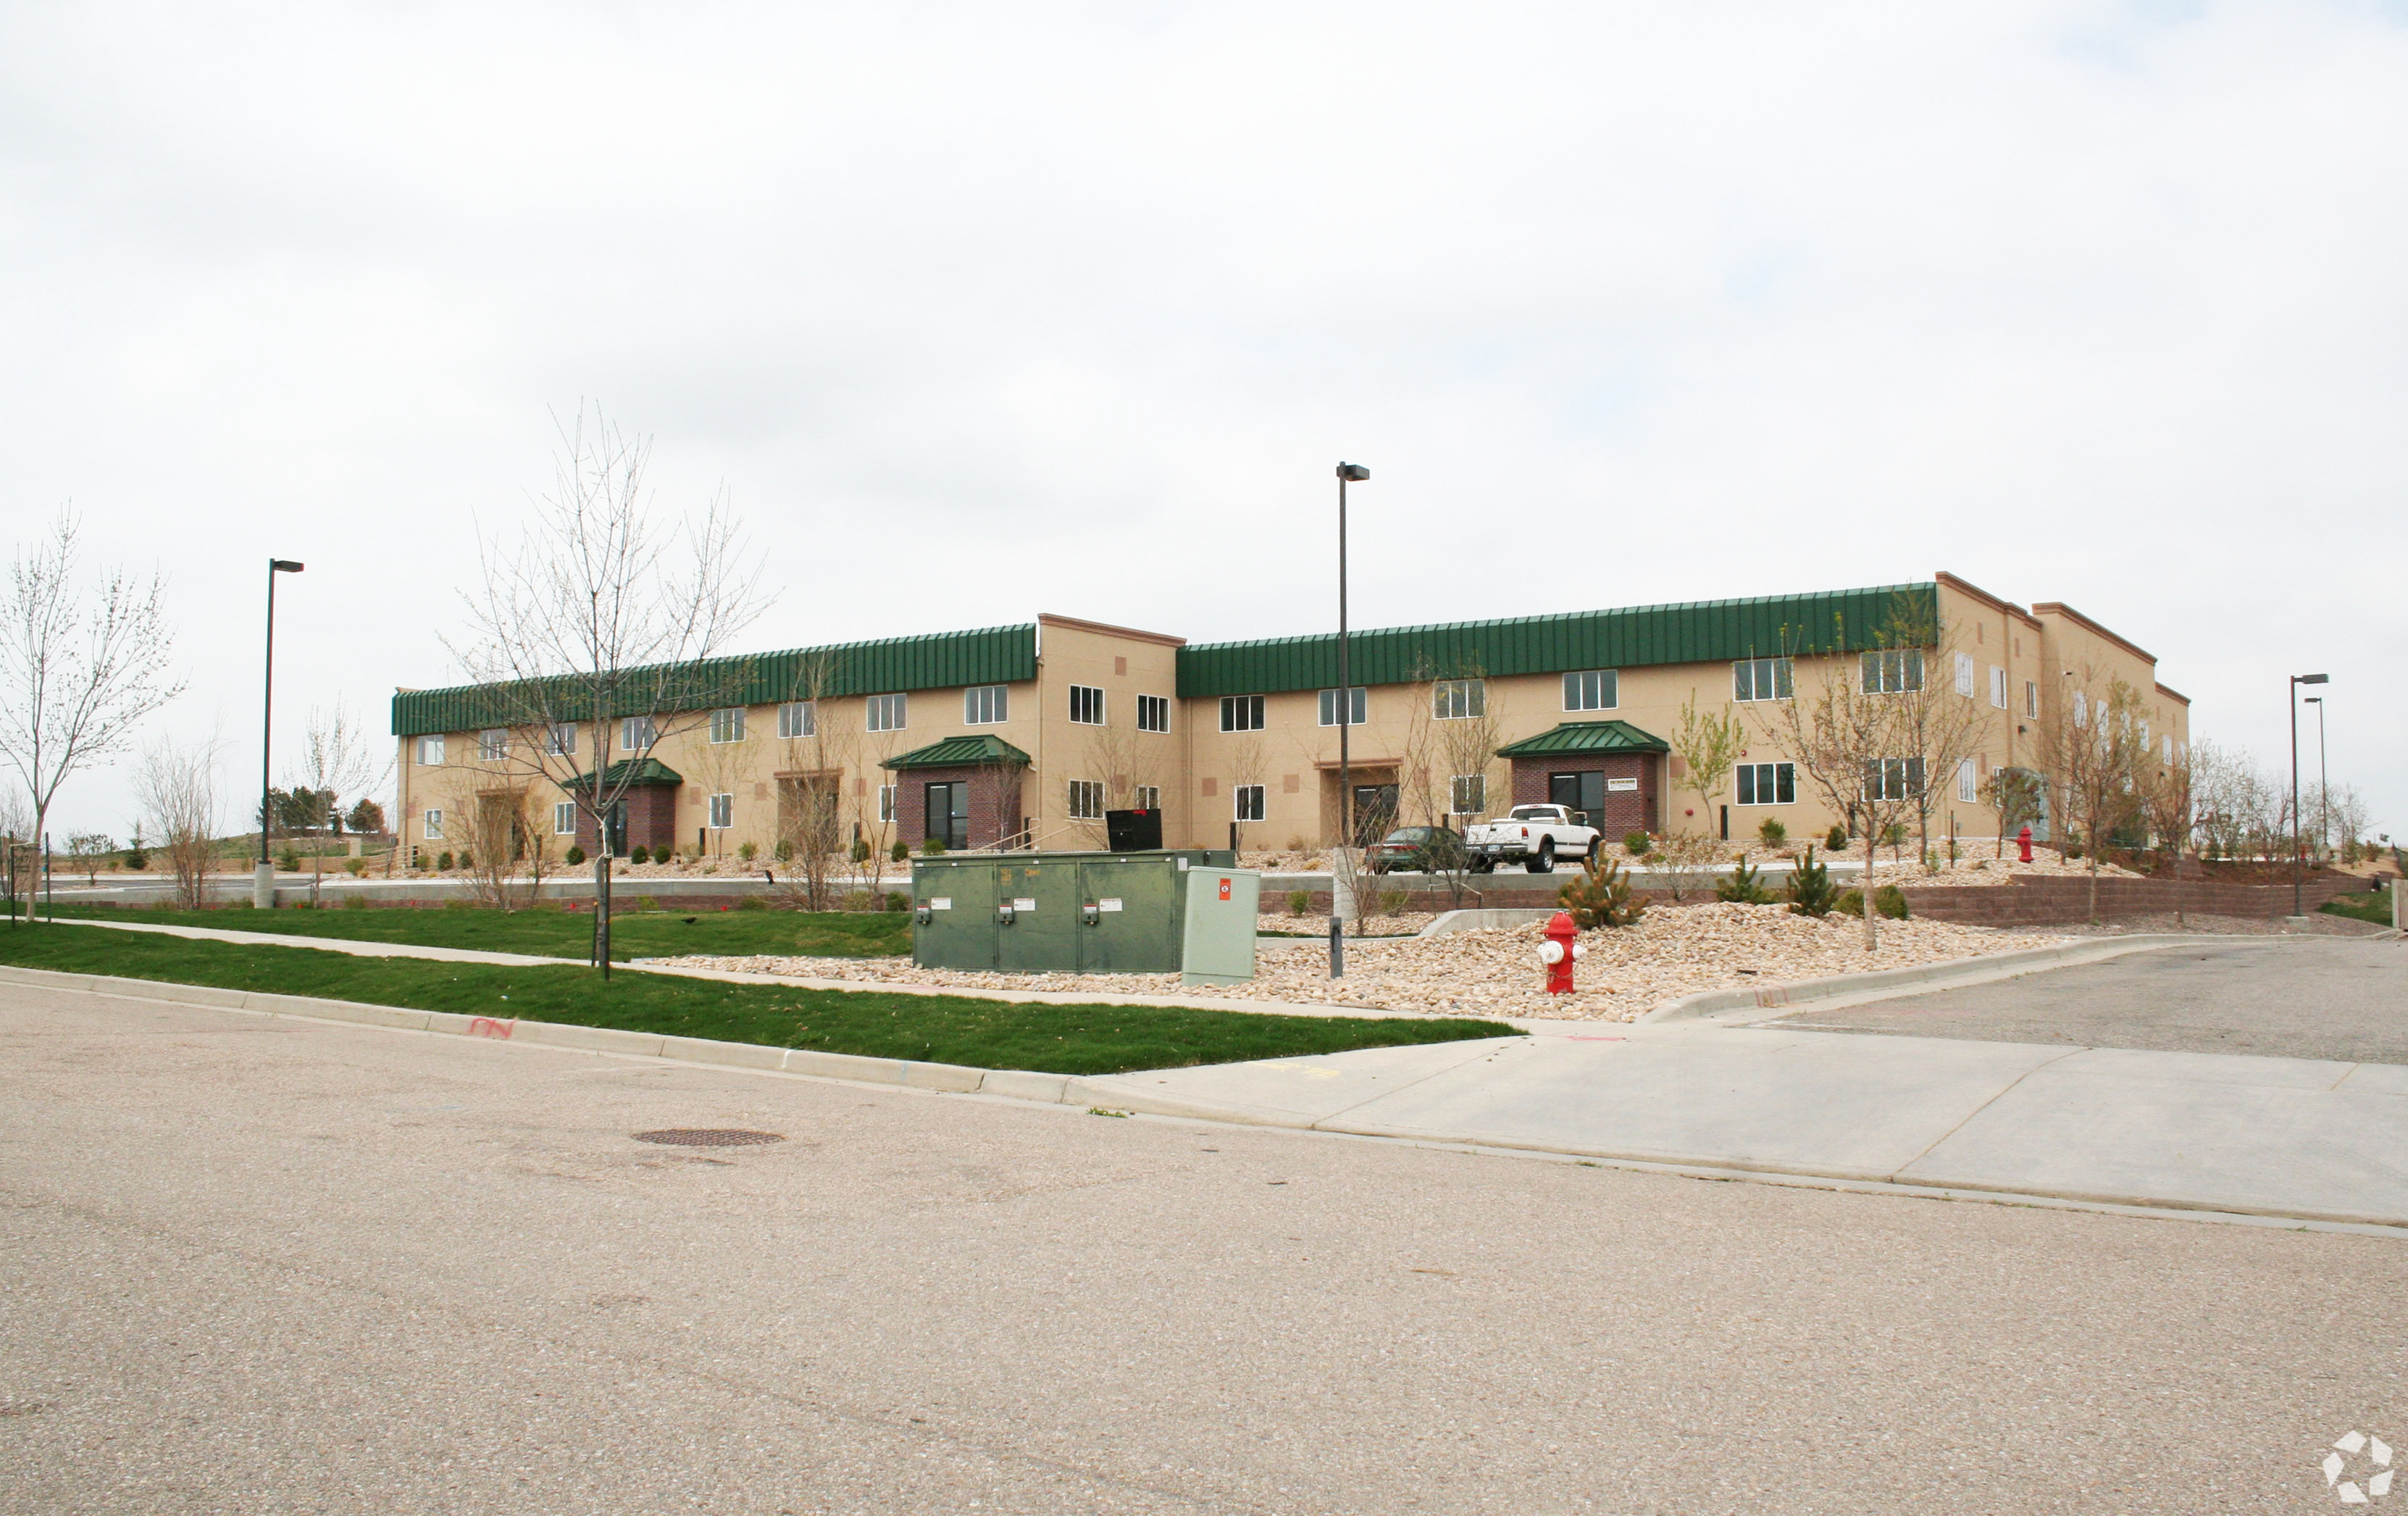 1475 Arthur Ave, Units 7 & 8 in Louisville, CO Sell for $2,165,000